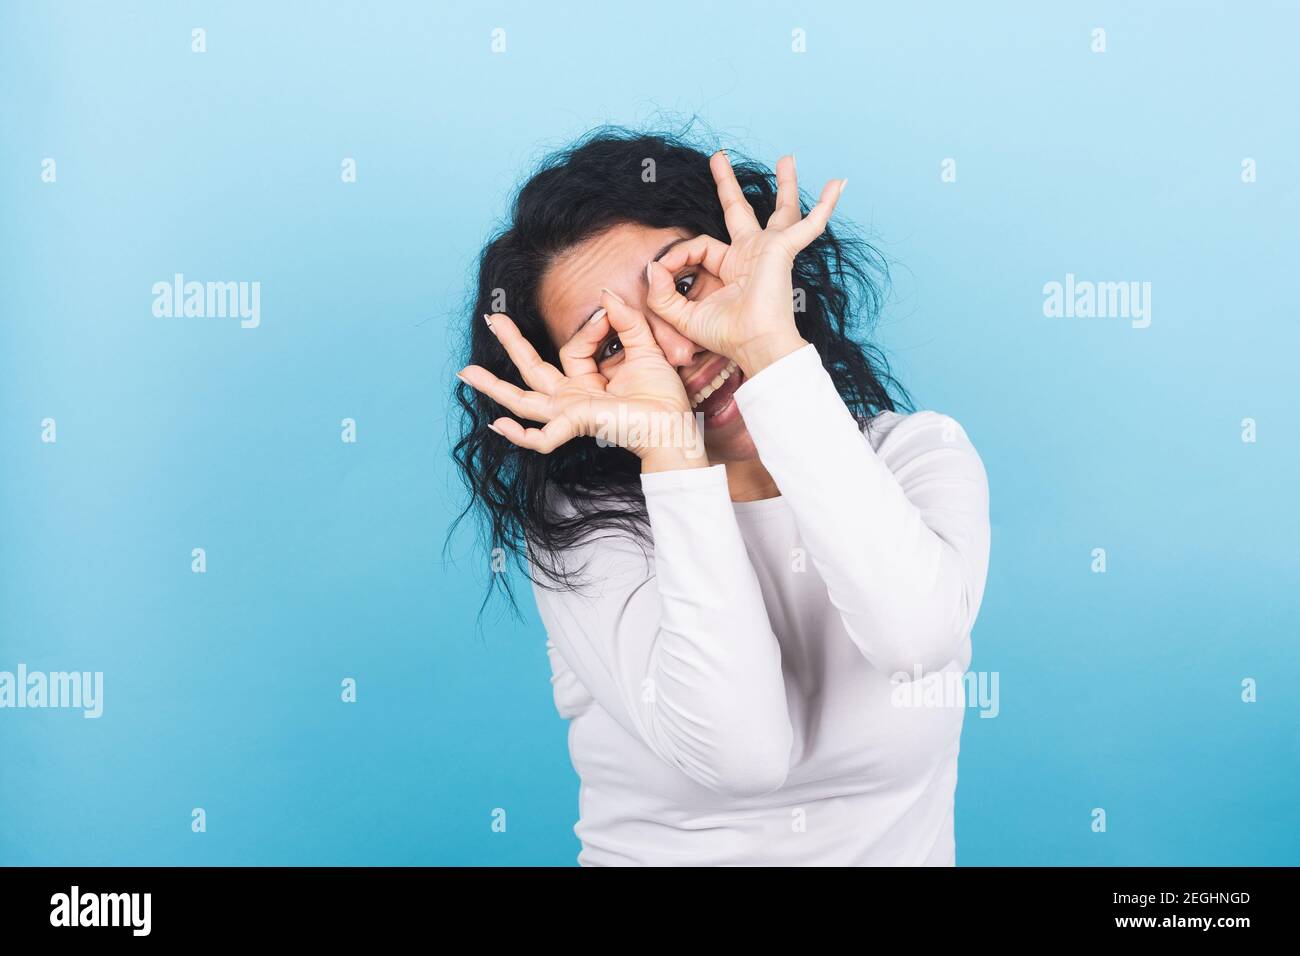 Young brunette woman makes the eyeglasses gesture with her hands Stock Photo